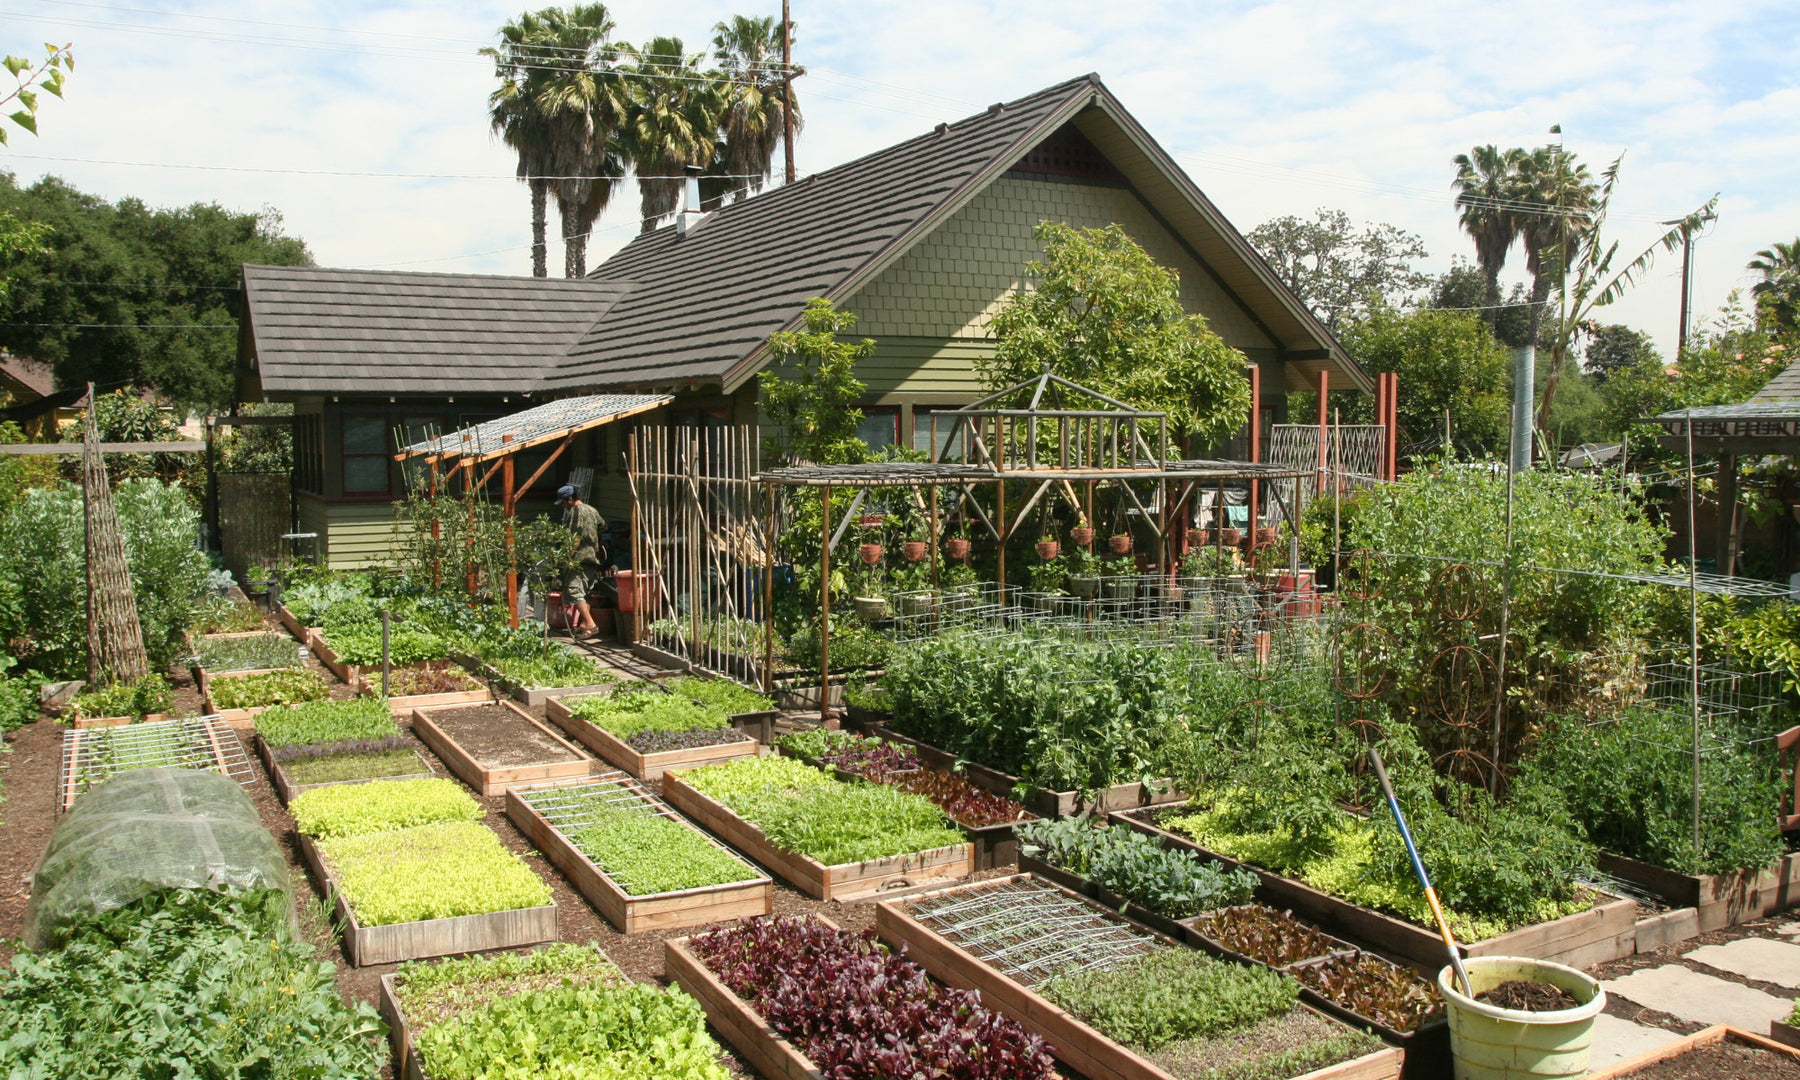 Meet the Family Growing 6,000 Pounds of Food on Just 1/10 Acre: A Lesson in Sustainable Farming